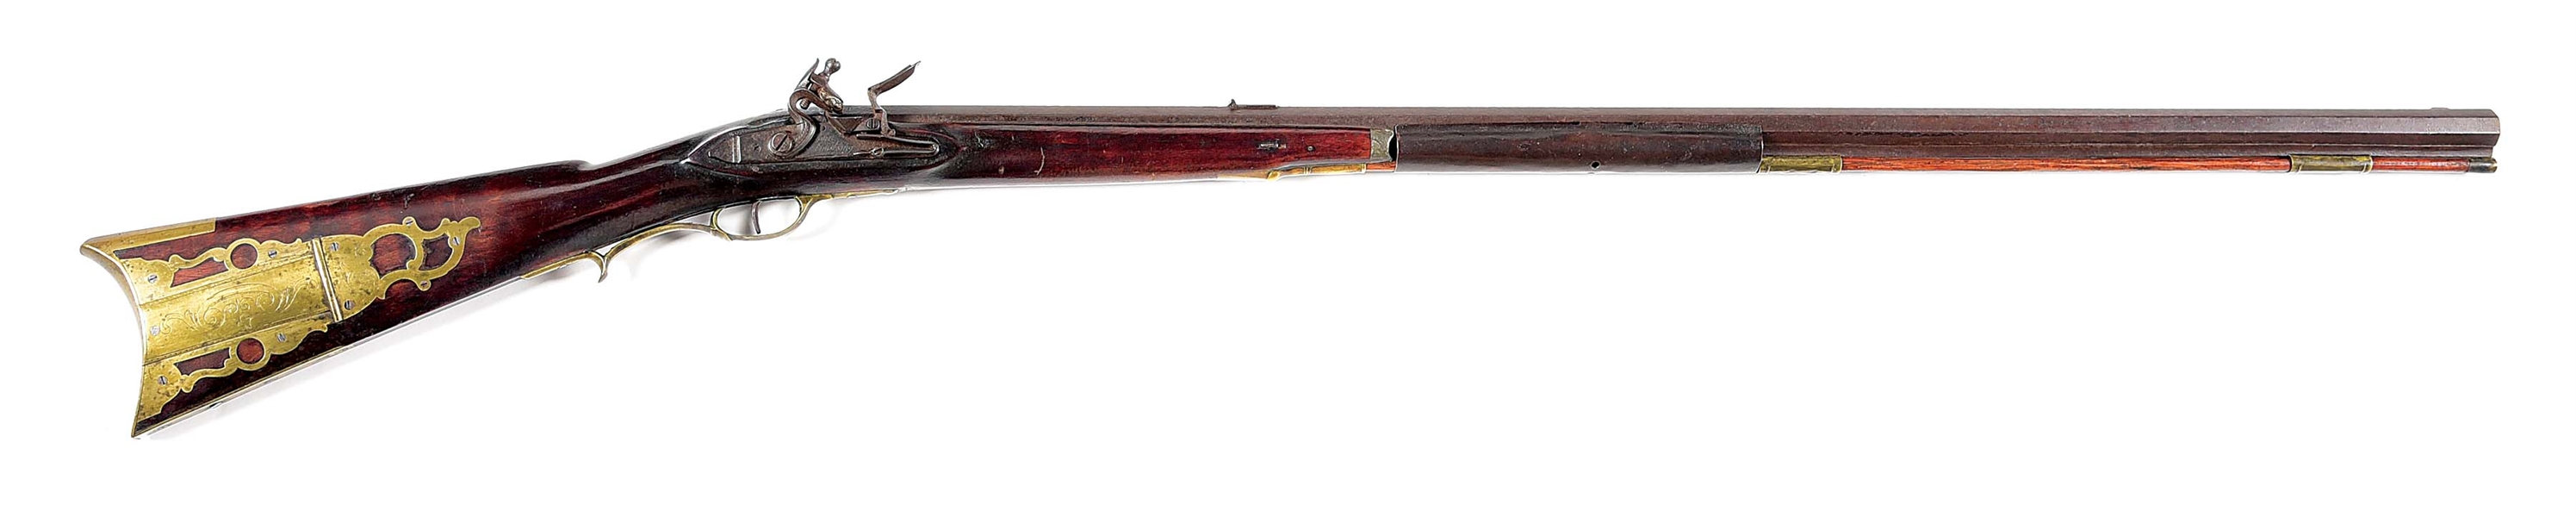 (A) PERIOD RESTOCKED KENTUCKY RIFLE WITH JOHN ARMSTRONG SIGNED BARREL AND LOCK.